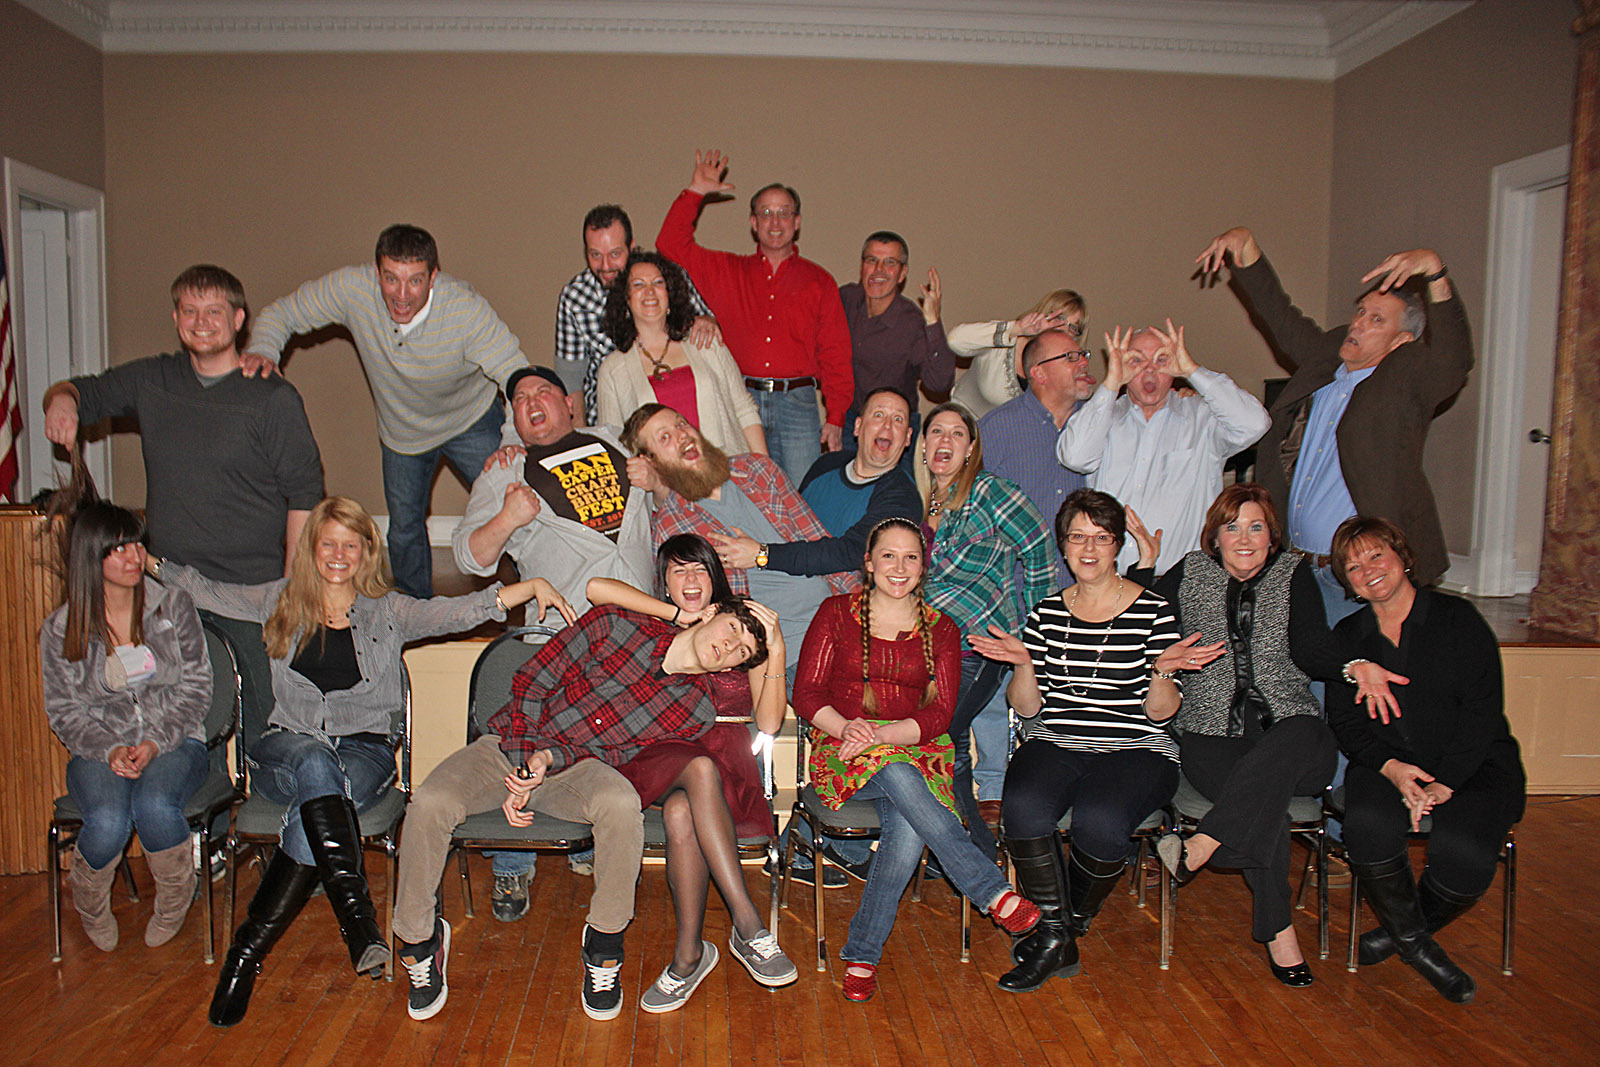 The IVP Crew & Staff having some fun at the Christmas Party.